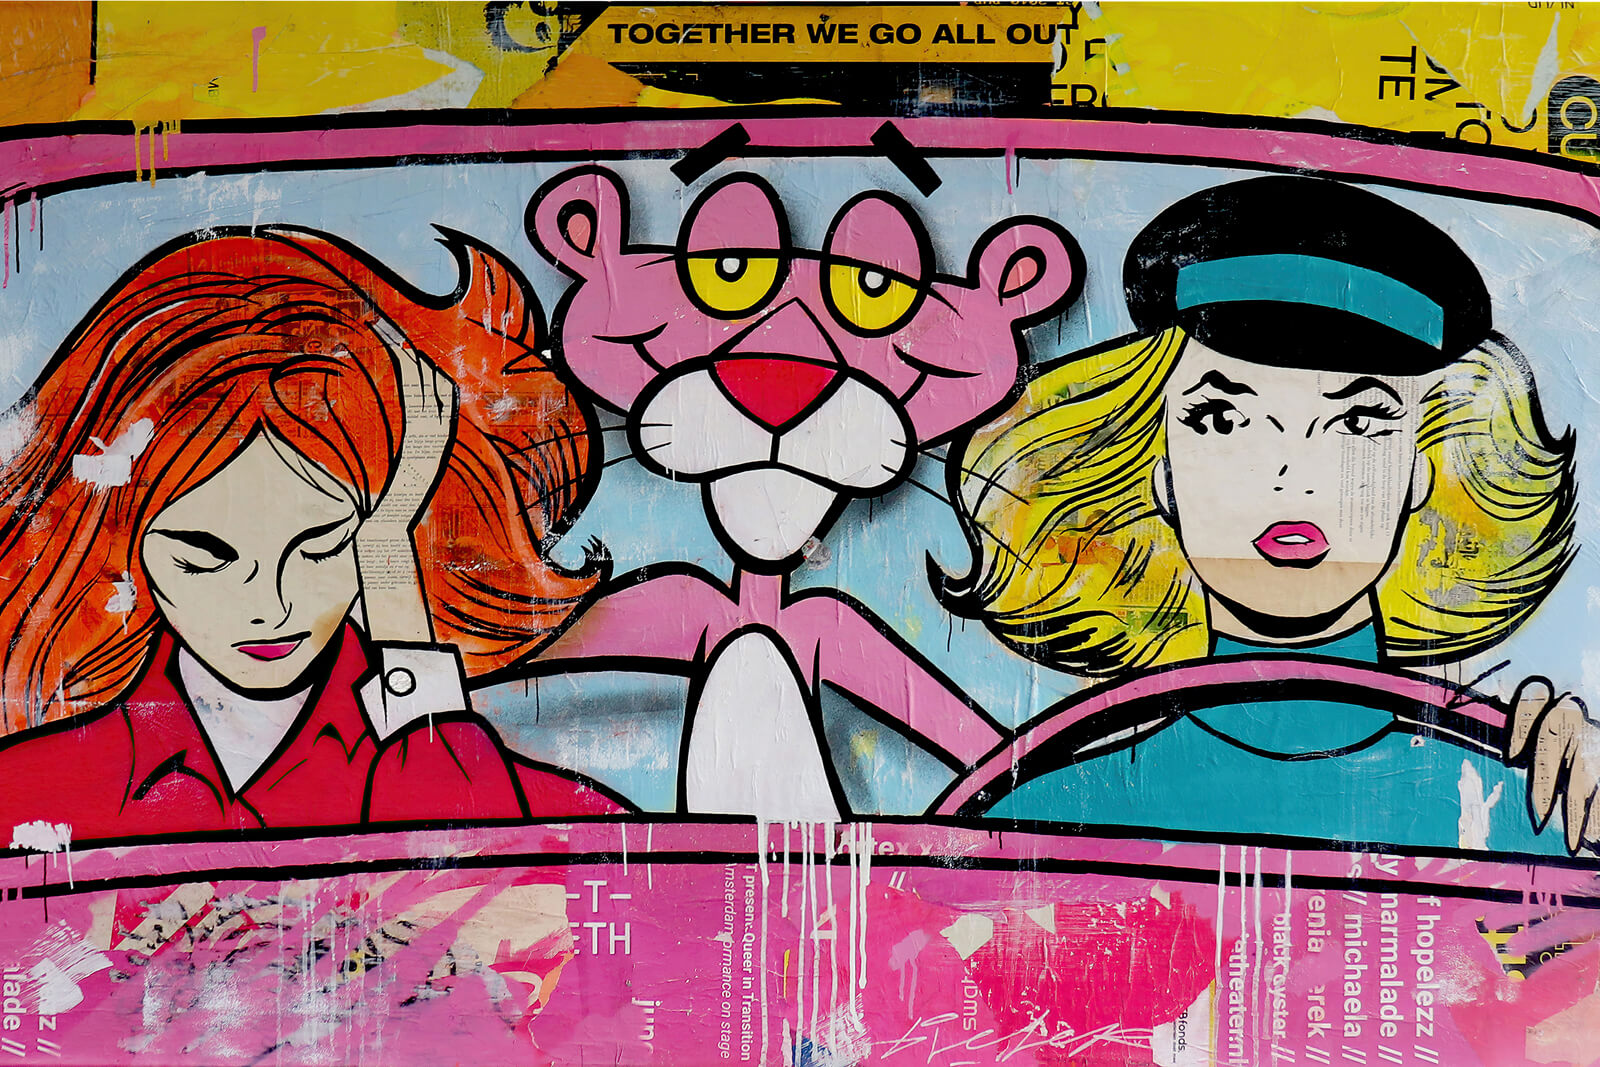 Street Graffiti Art Canvas Painting Pink Panther Posters and Prints Wall Art 